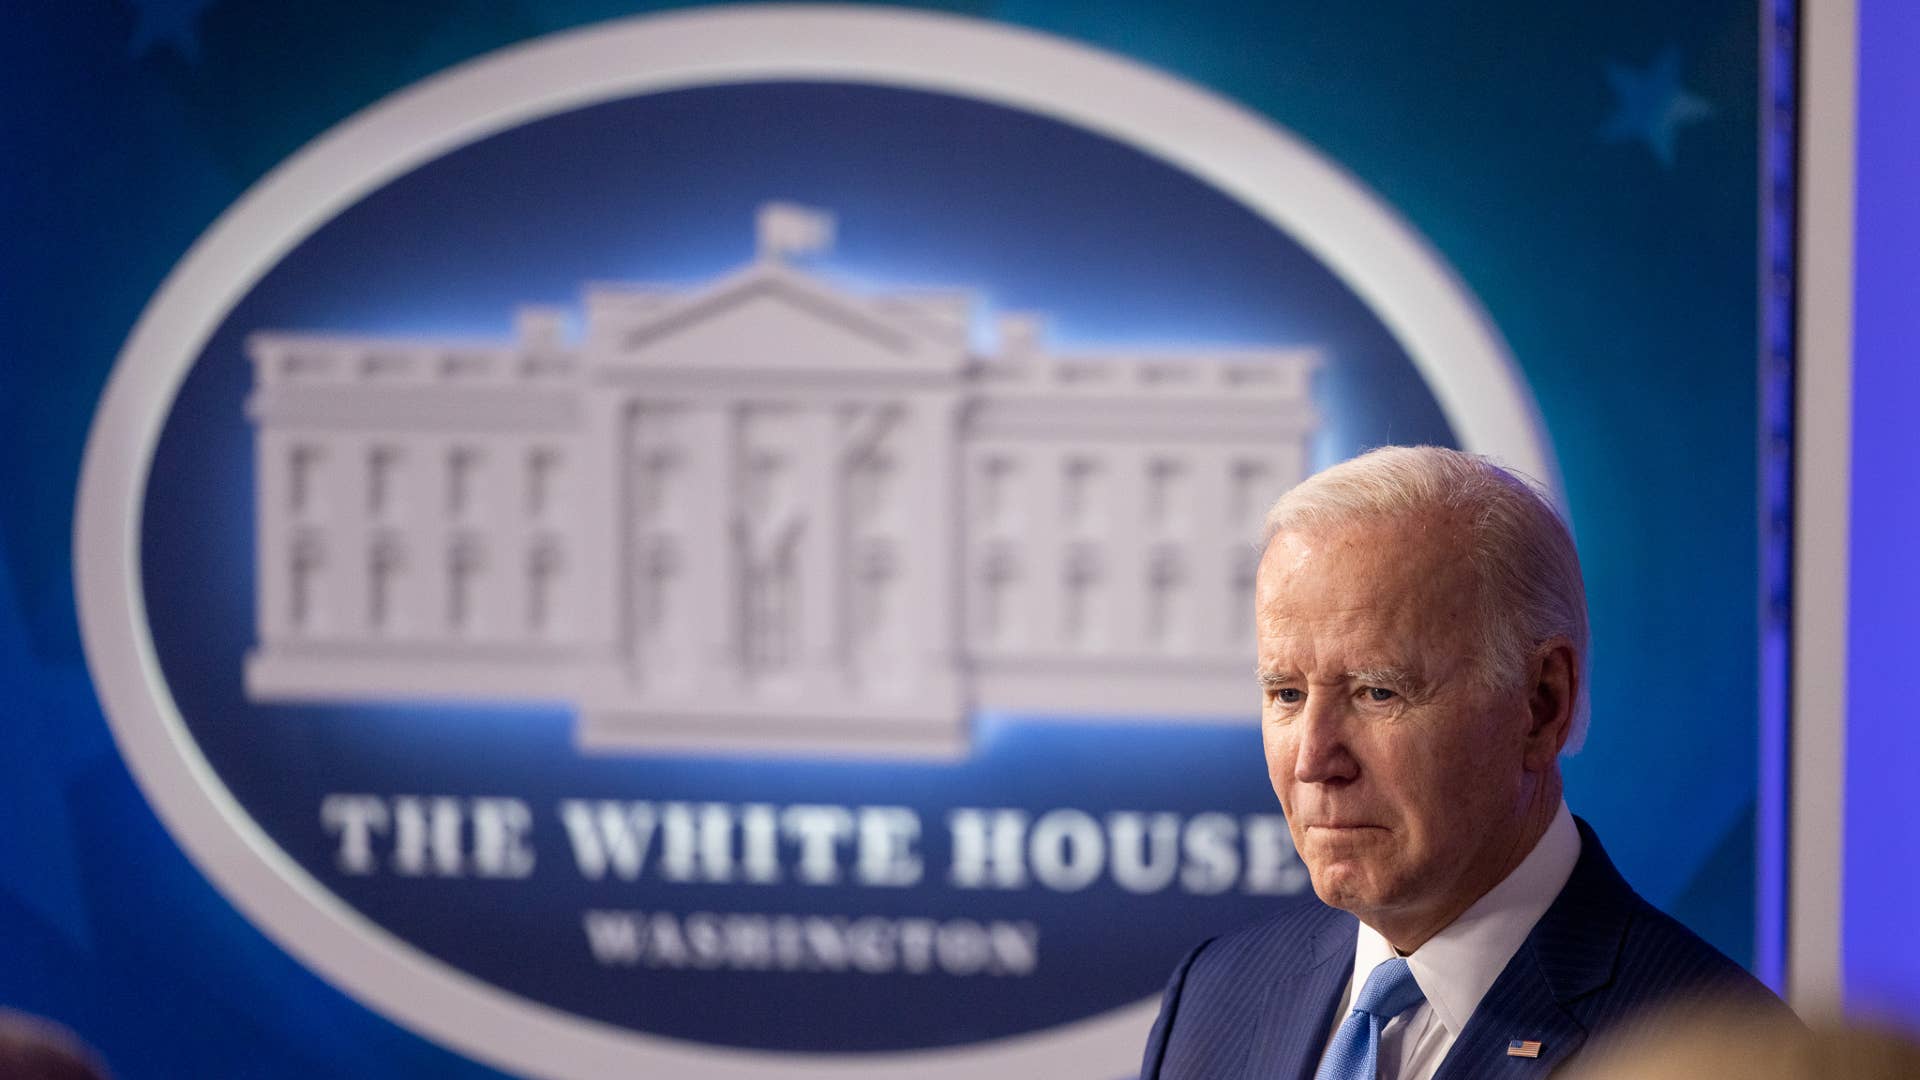 Biden is seen in front of a White House logo